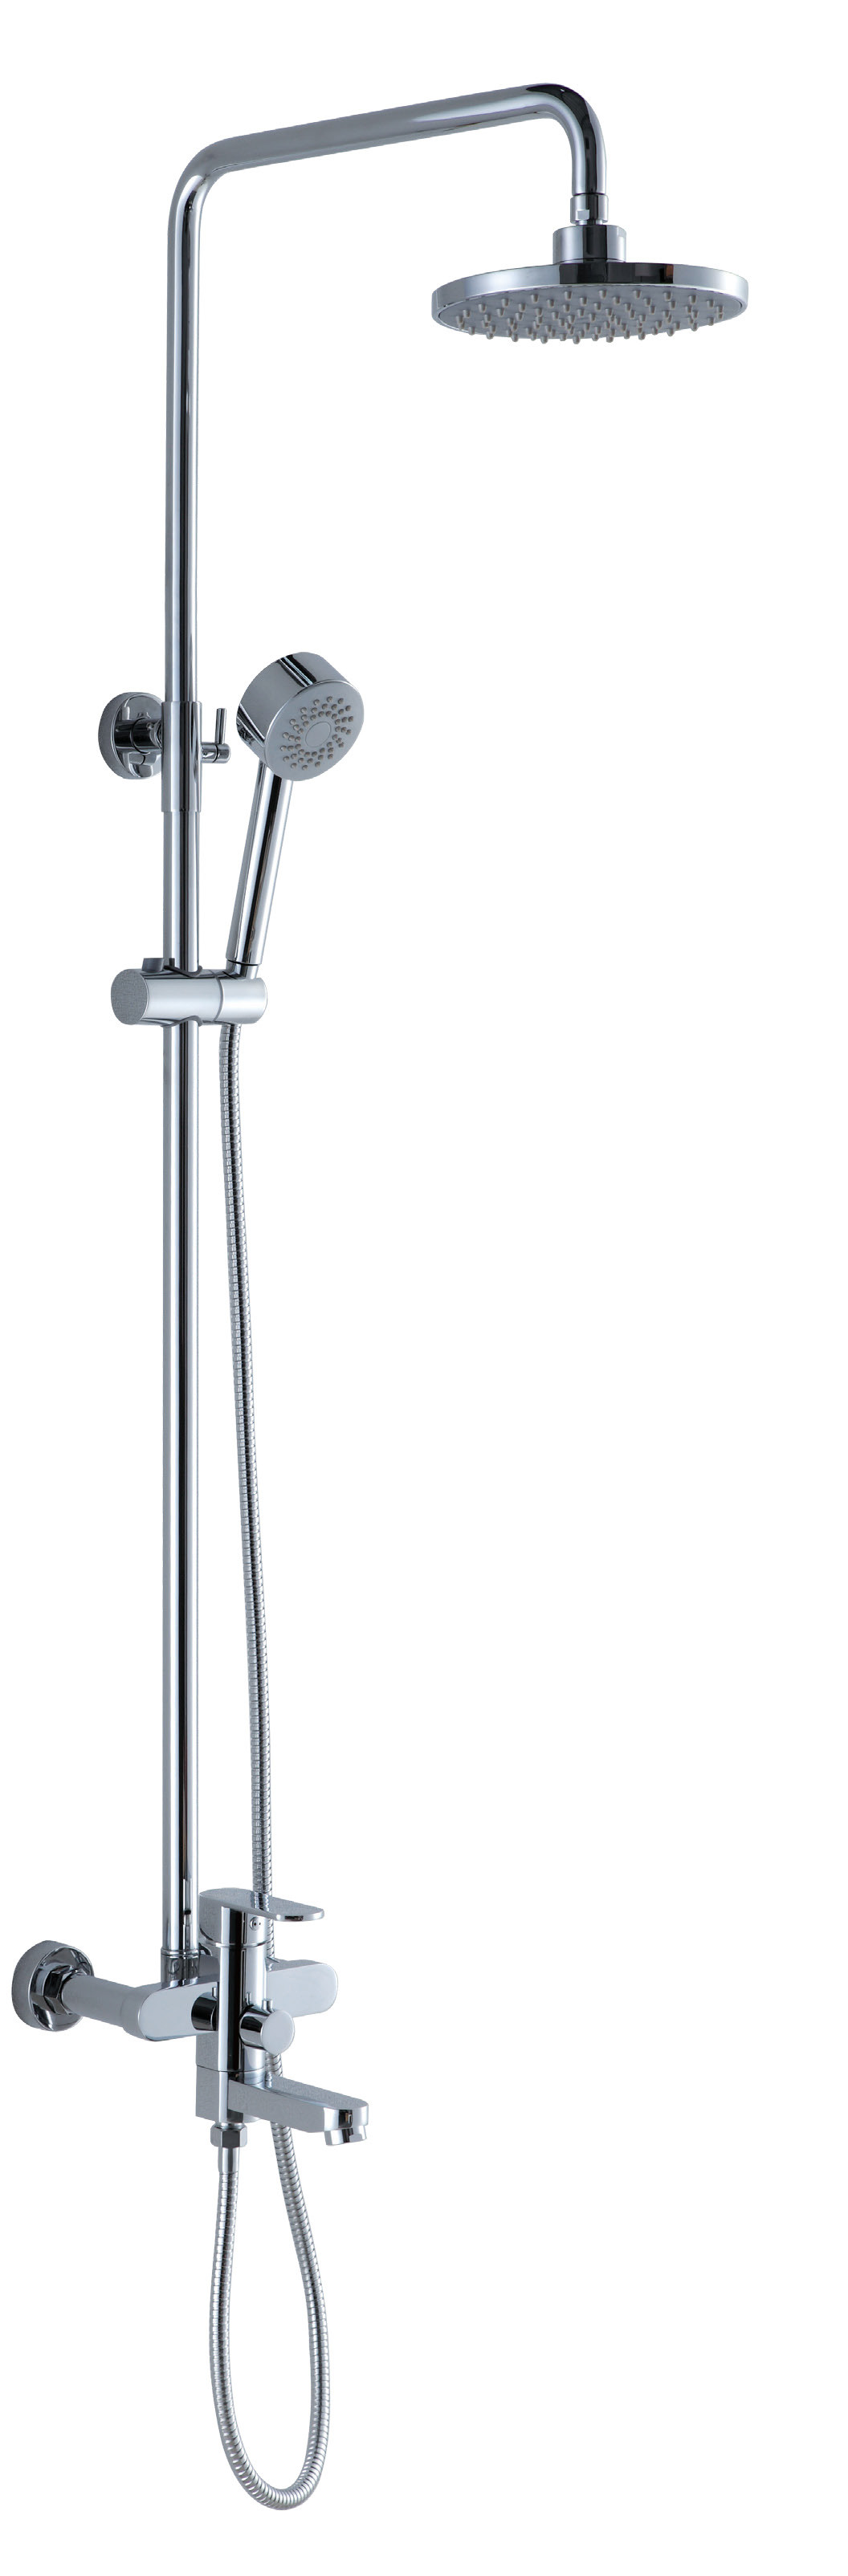  Durable Ceramic Single Handle Tub And Shower Faucet Automatic Shower Mixer Manufactures